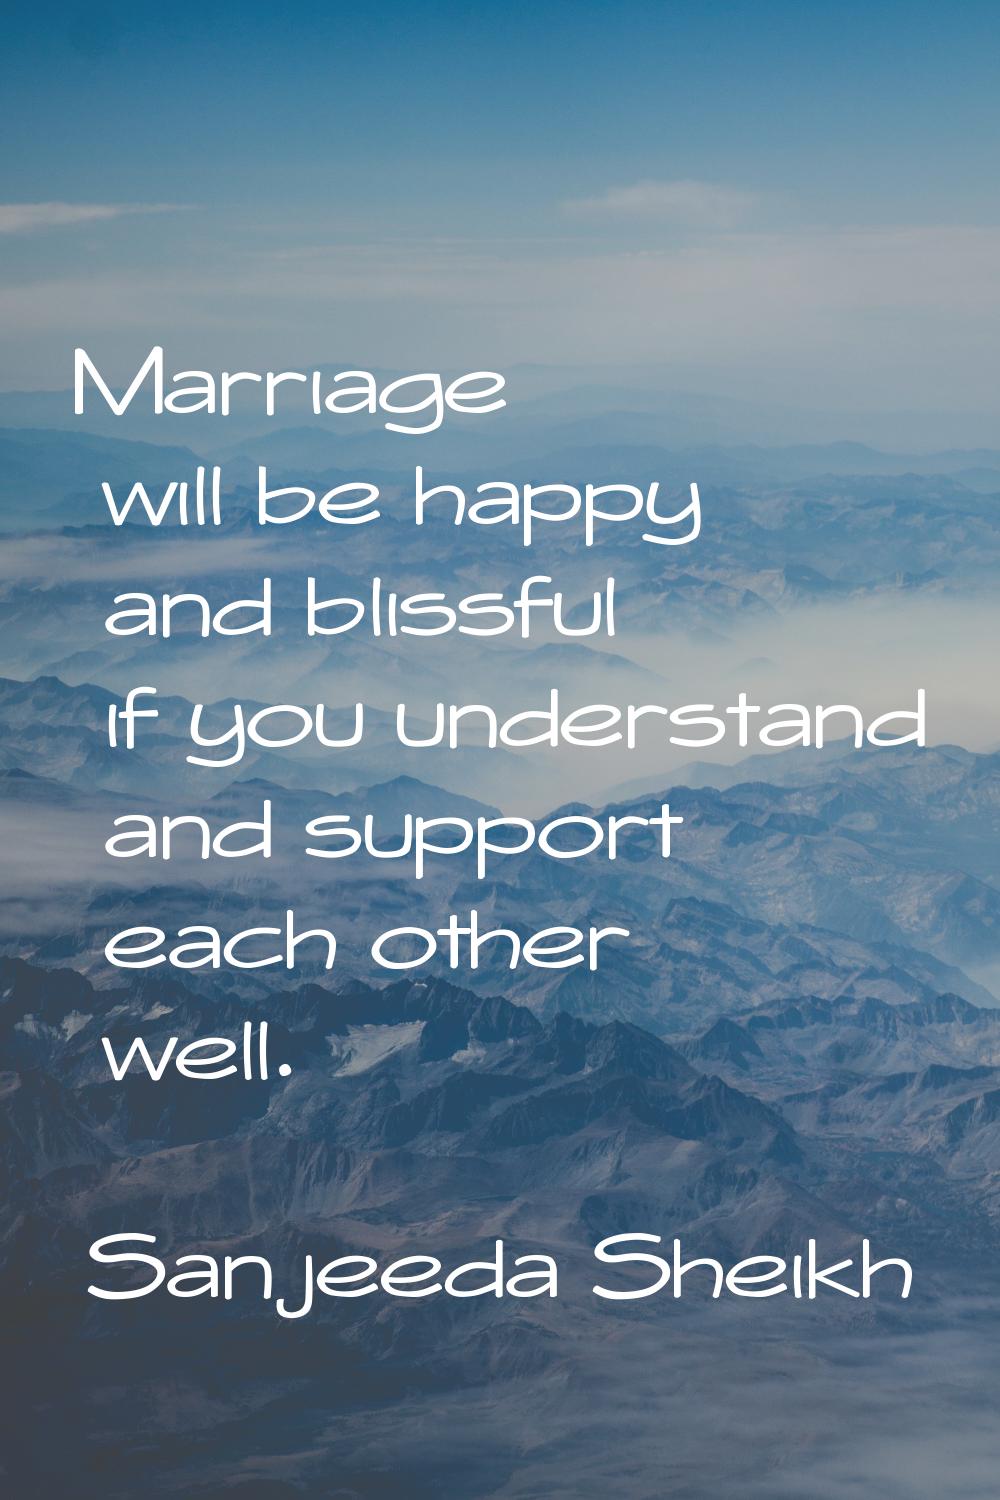 Marriage will be happy and blissful if you understand and support each other well.